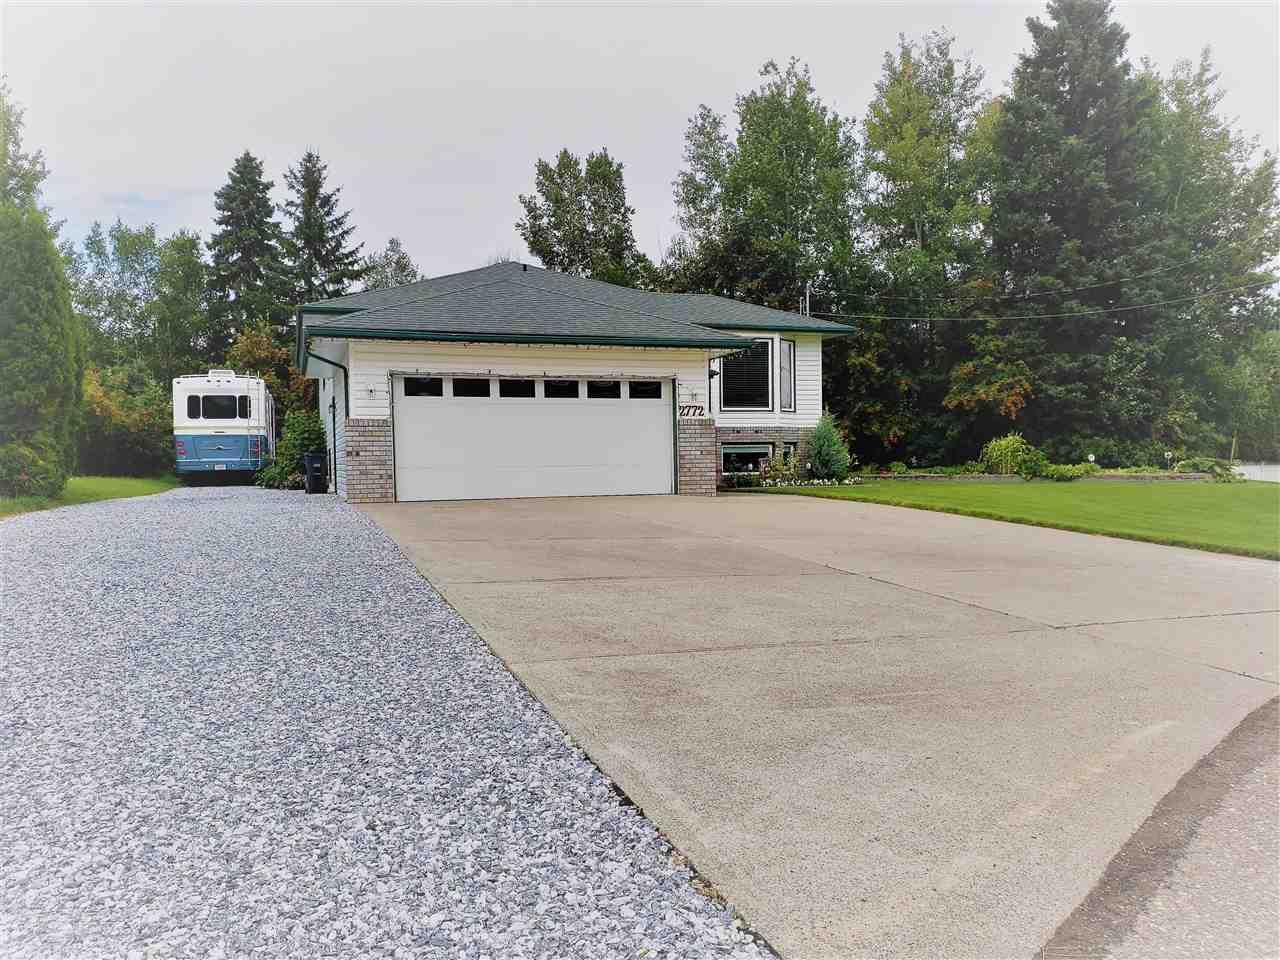 I have sold a property at 2772 STARLANE PL in Prince George
